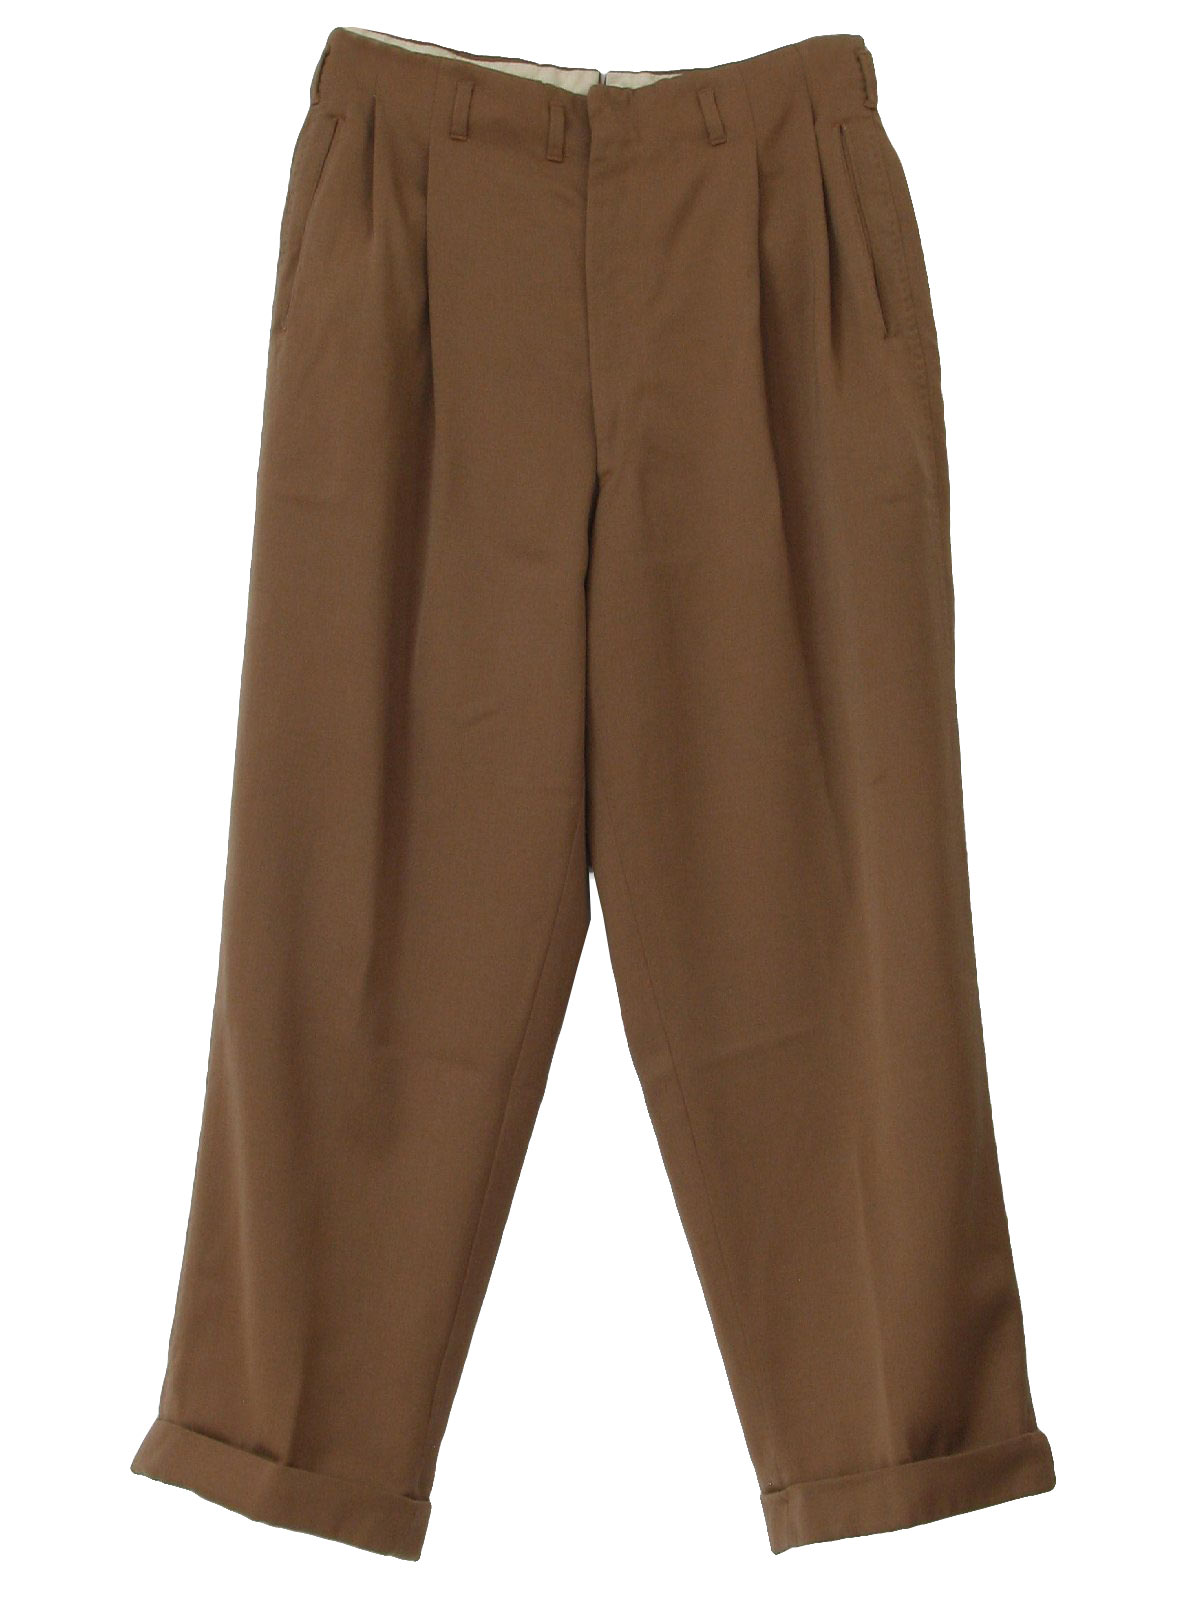 NIMIN High Waisted Wide Leg Pants for Women Loose Business Casual